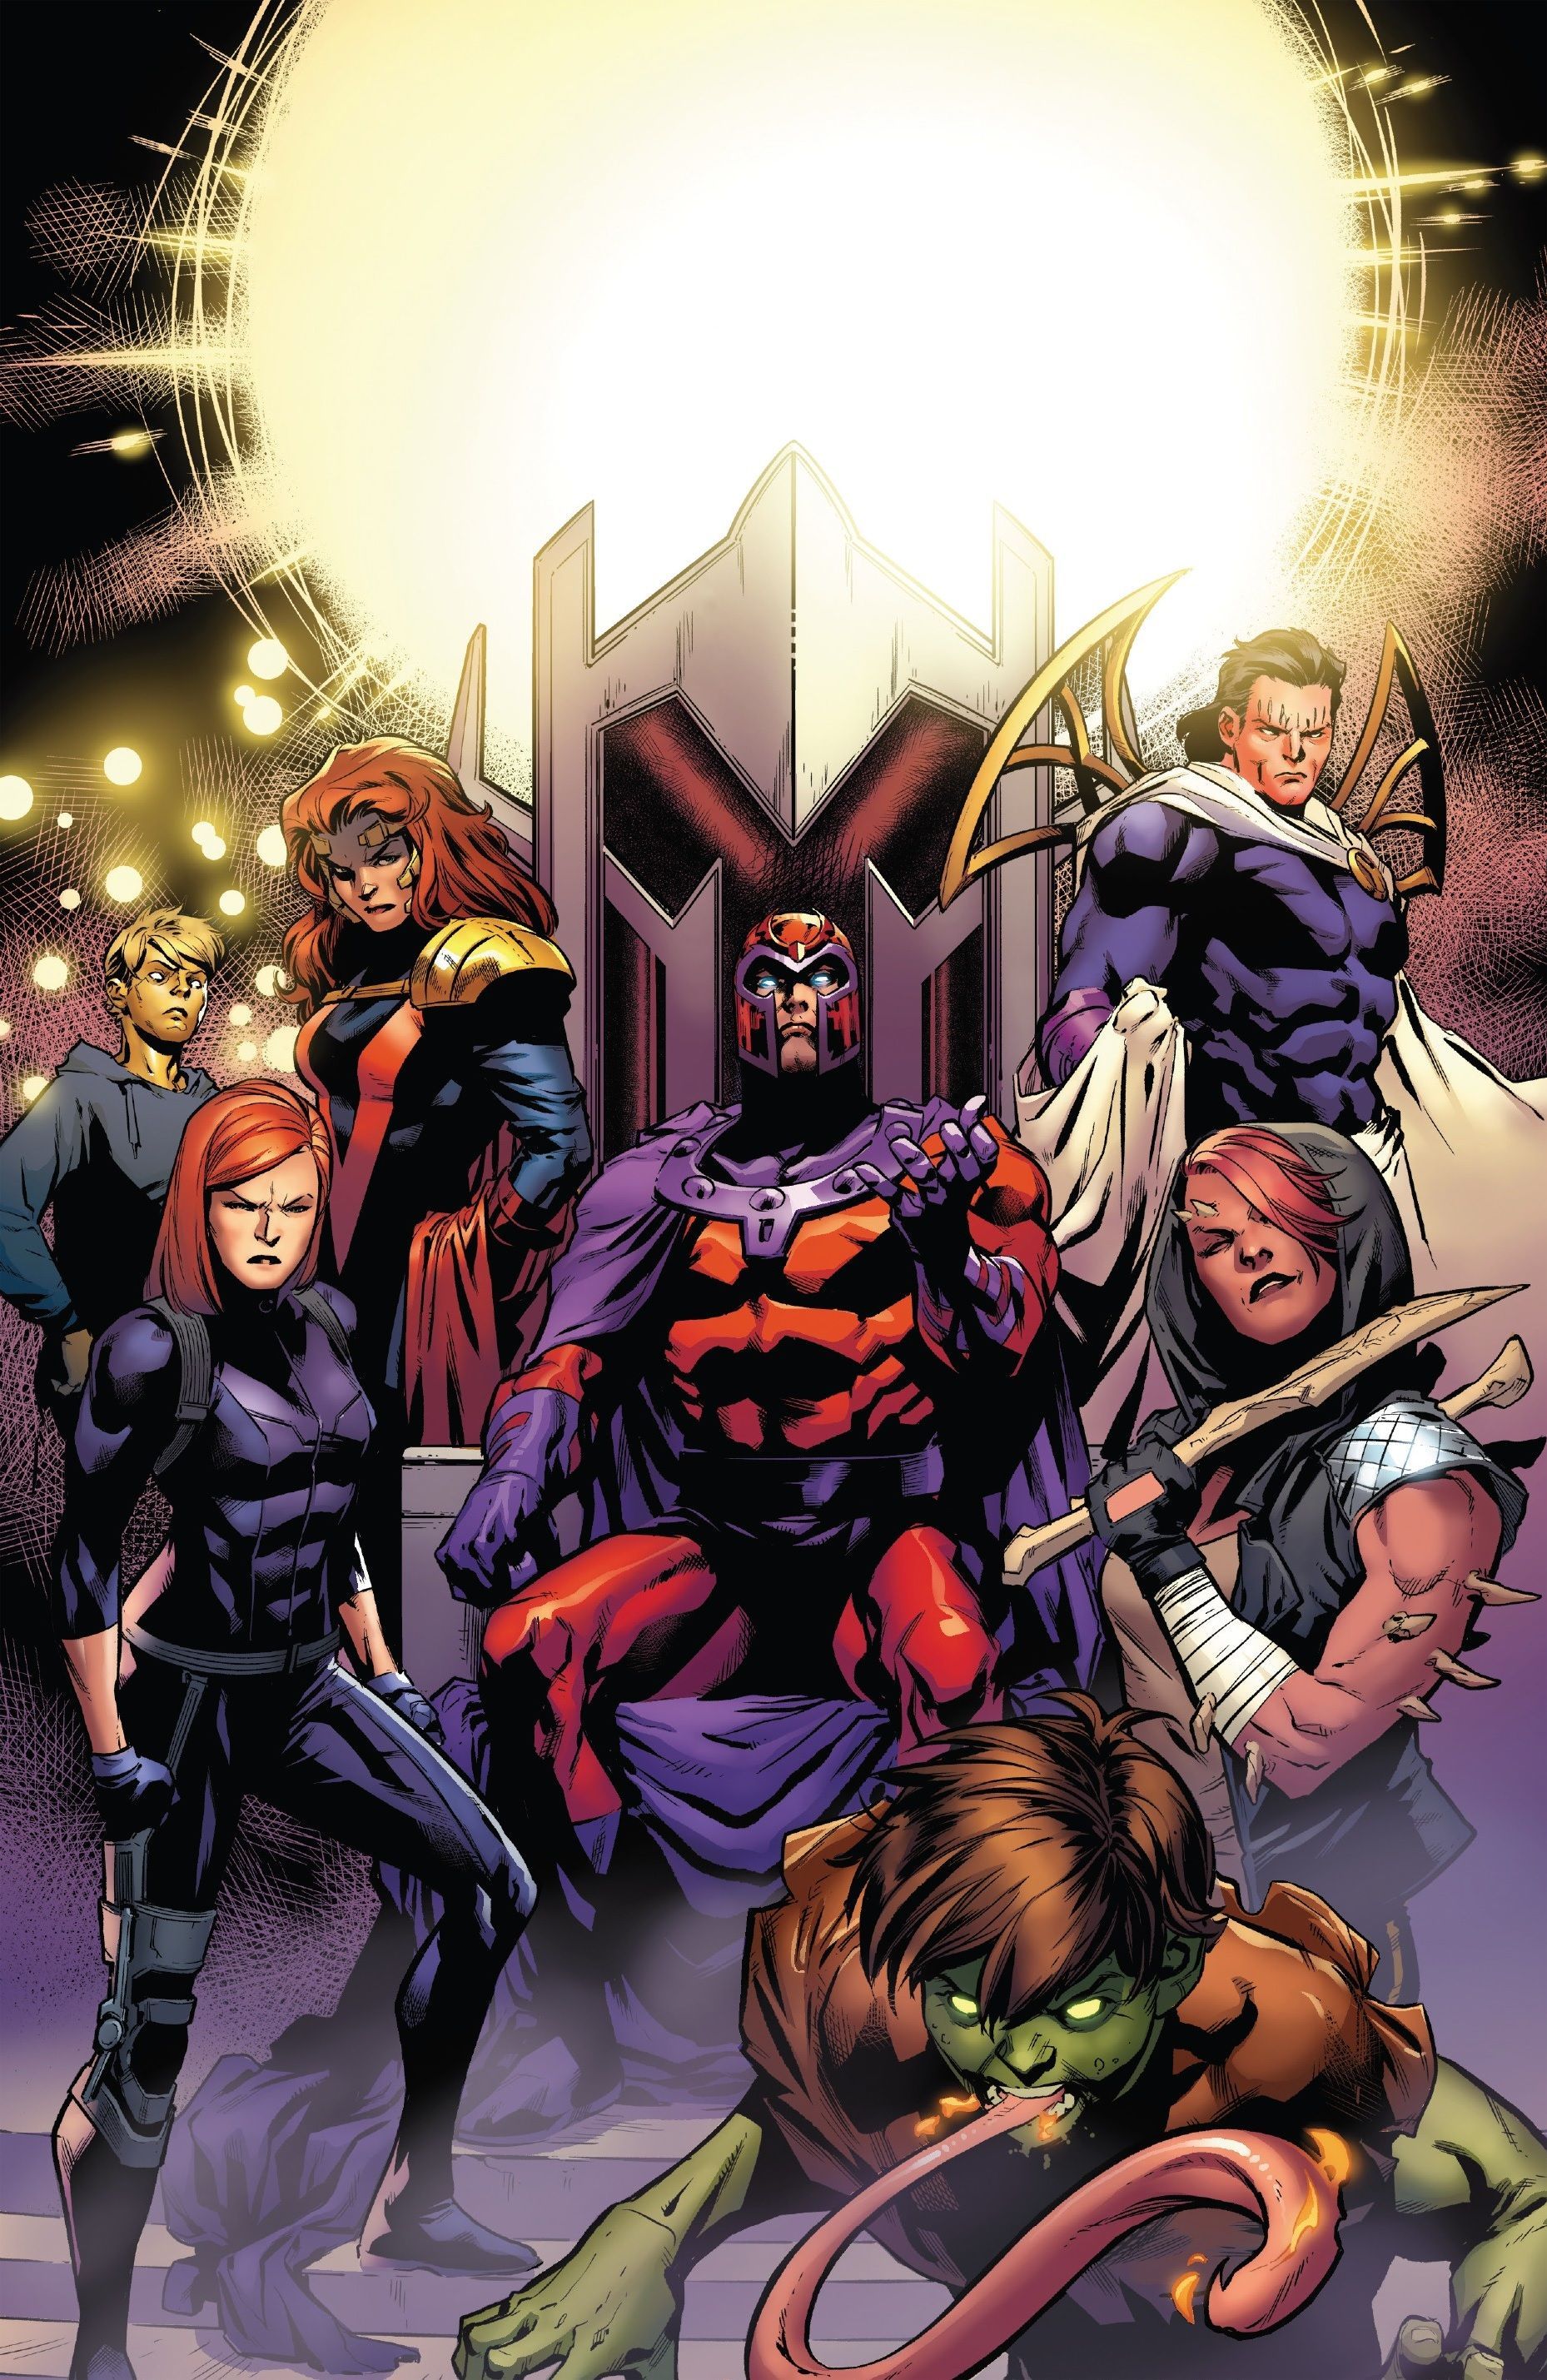 The Brotherhood of Mutants was a group dedicated to the cause of mutant superiority over humans. Throughout. Comics, Marvel comic universe, Marvel comic character